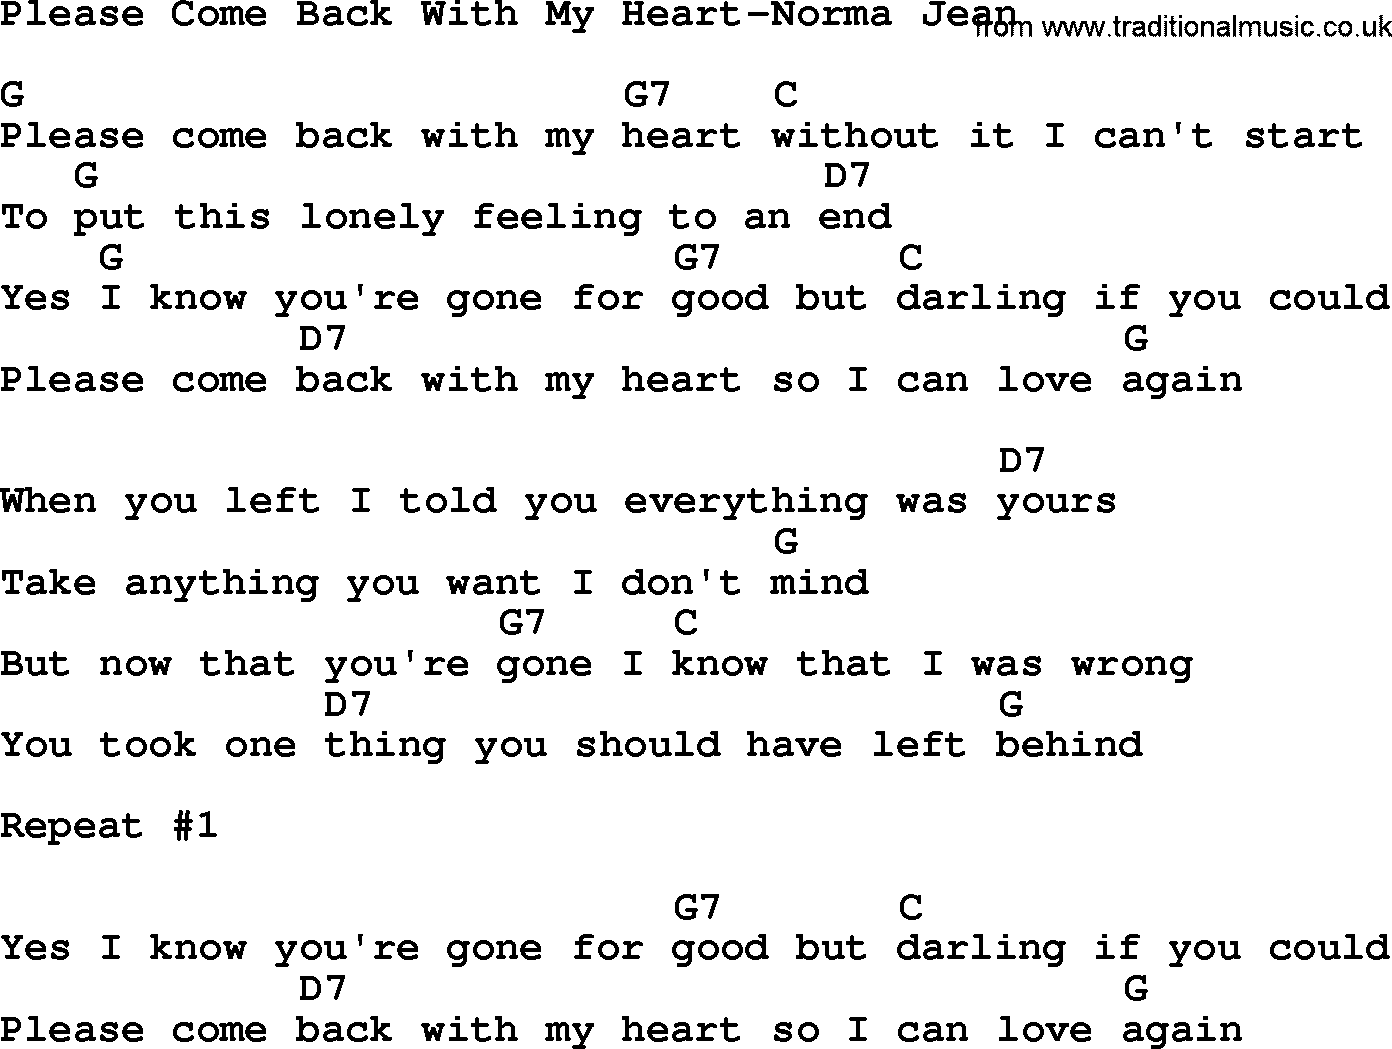 Country music song: Please Come Back With My Heart-Norma Jean lyrics and chords